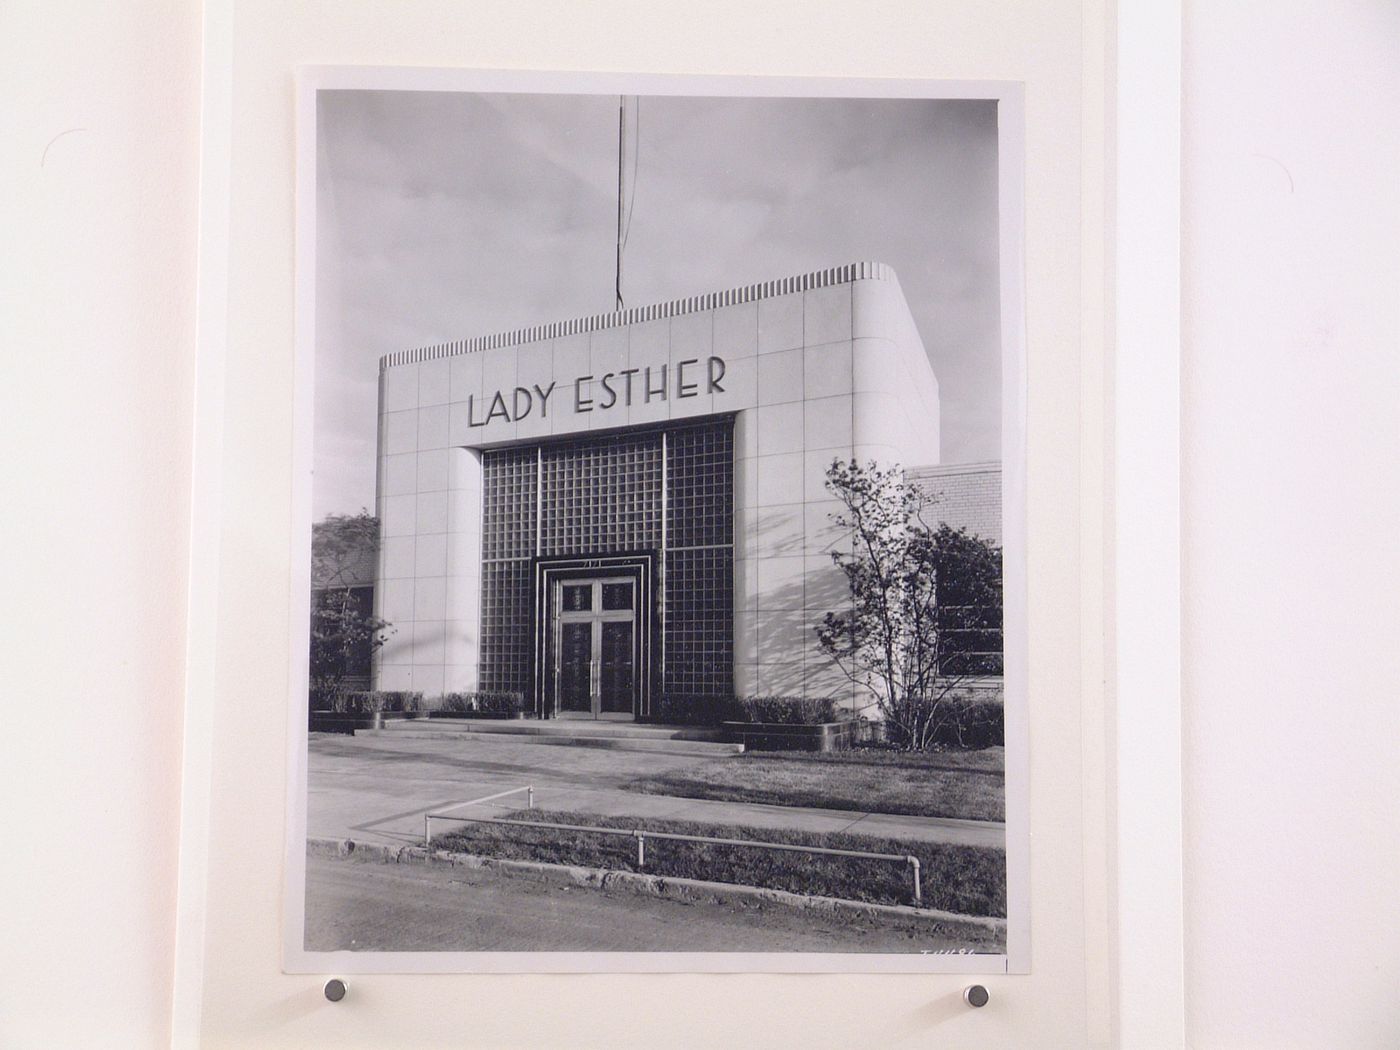 View of the main entrance to the Administration Building, Lady Esther Company, Chicago, Illinois